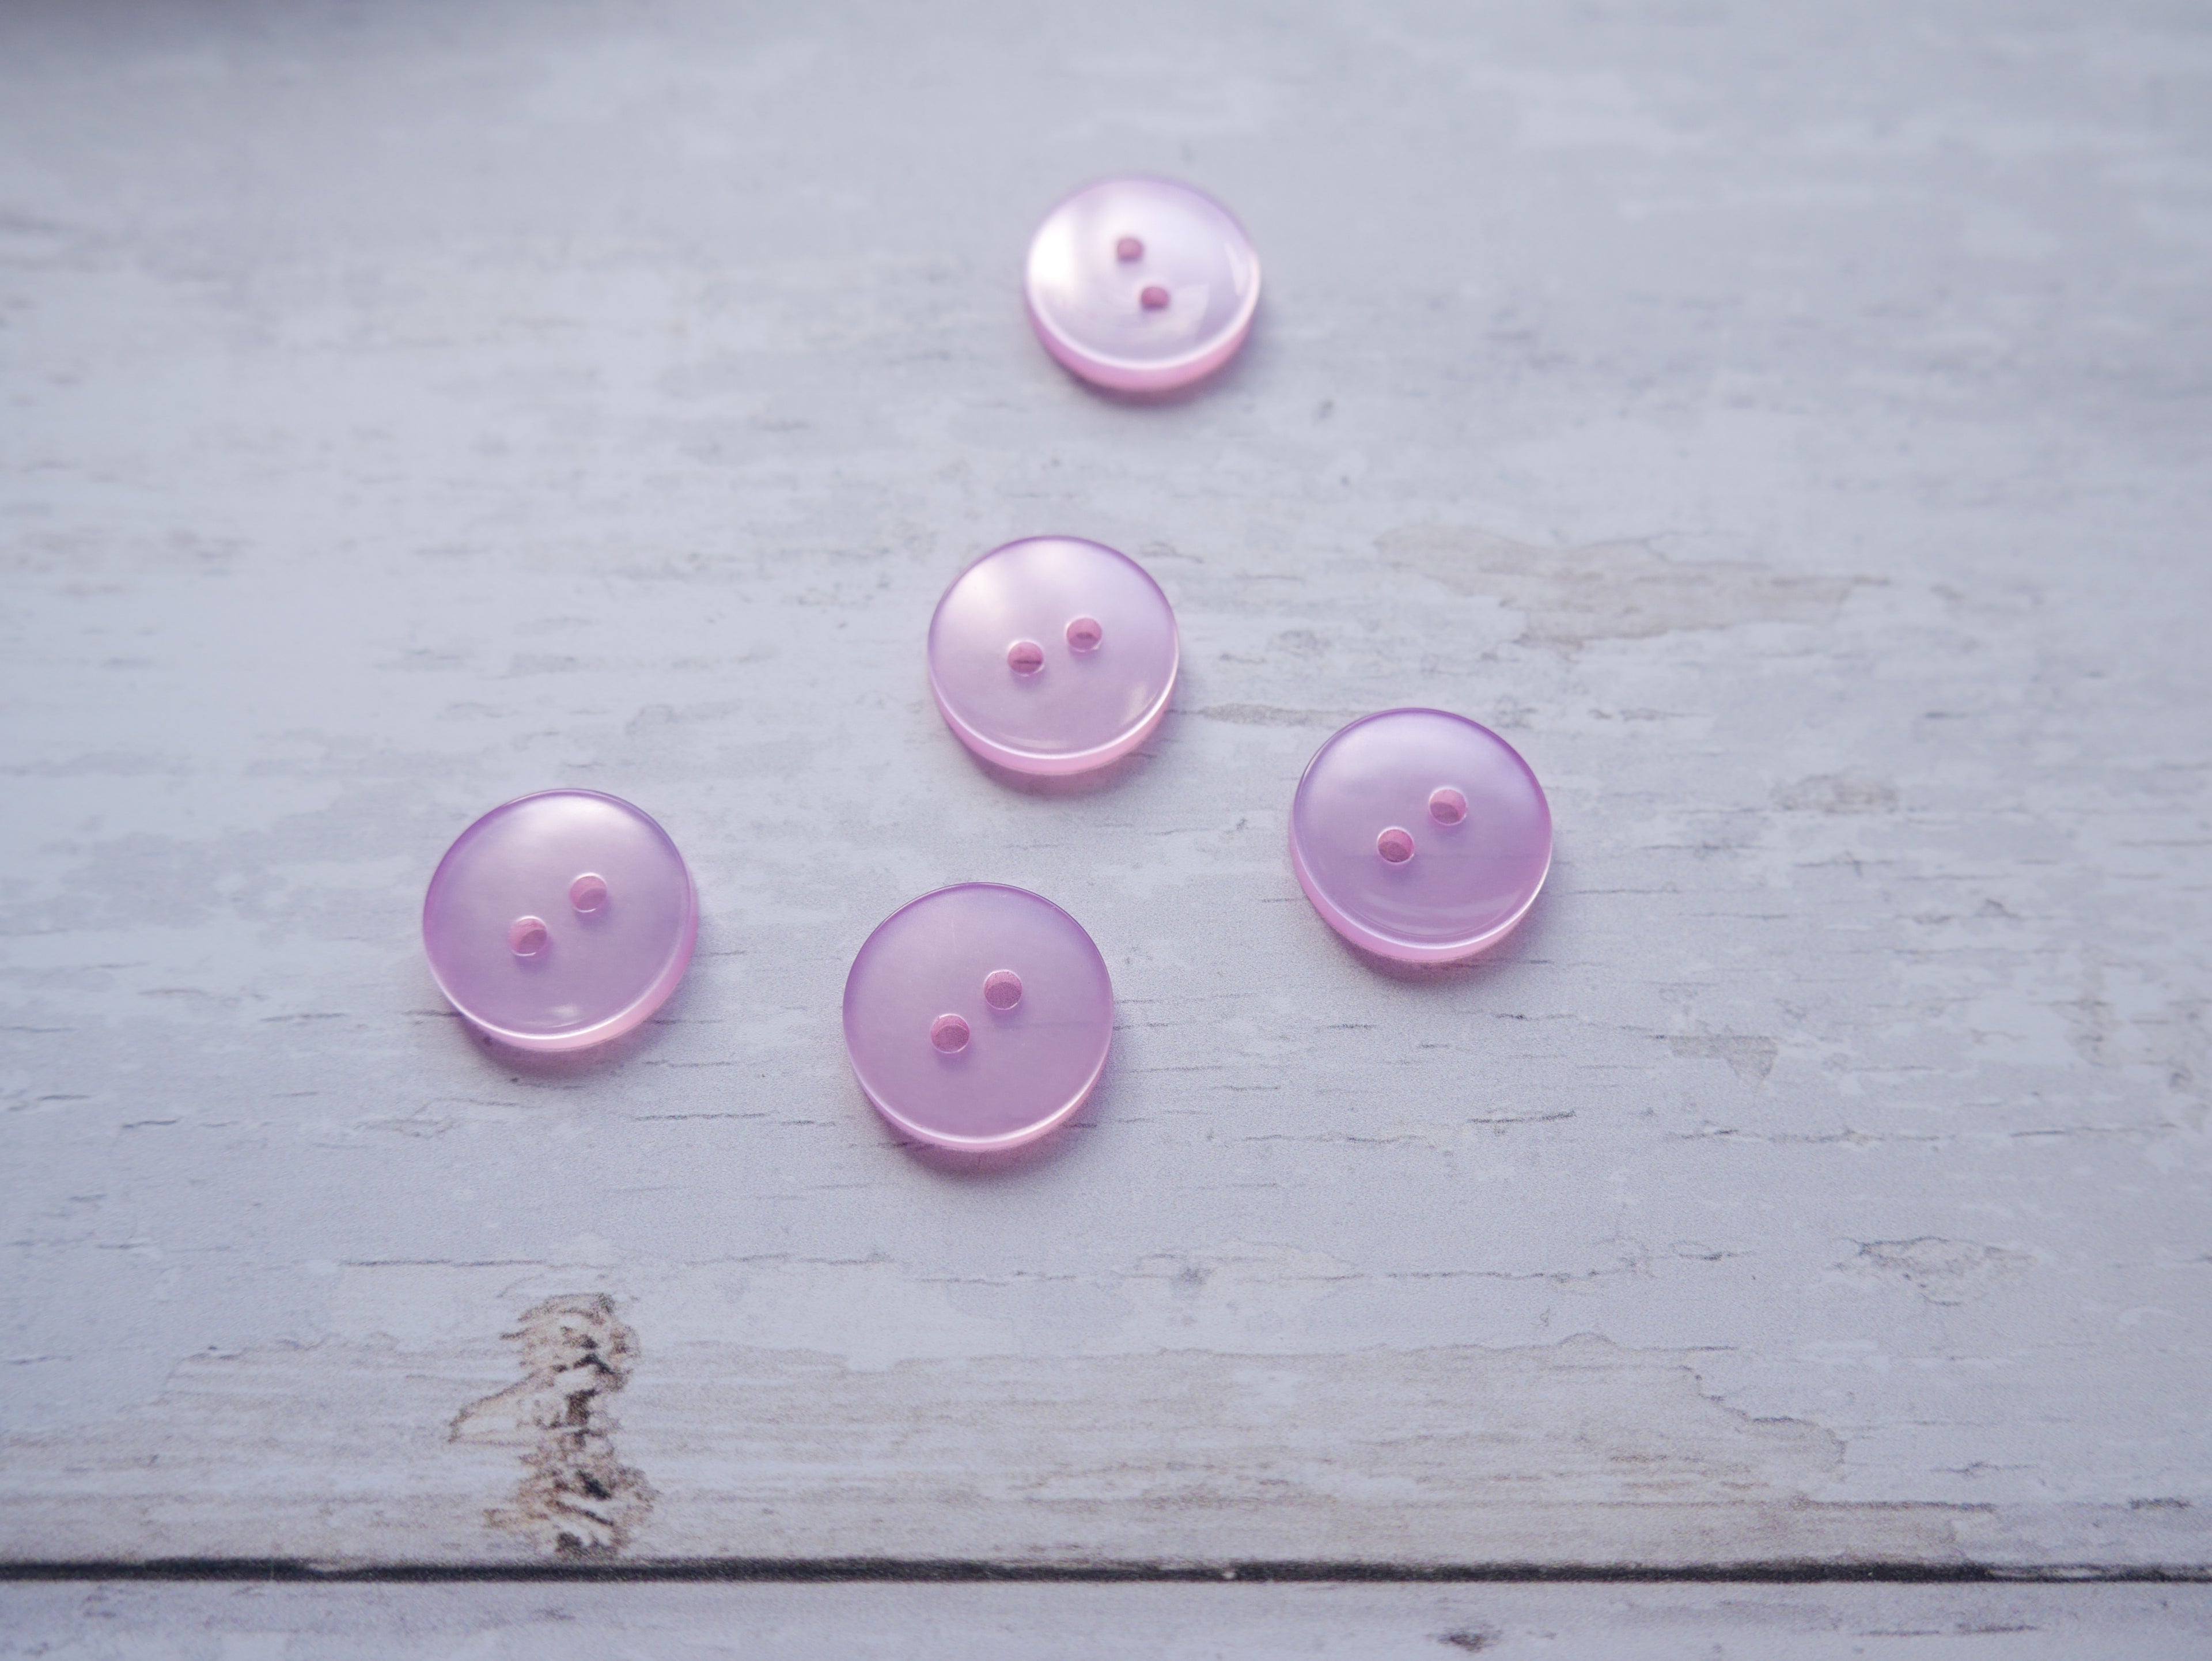 2-Hole 15mm Button in Pink-Button-Flying Bobbins Haberdashery